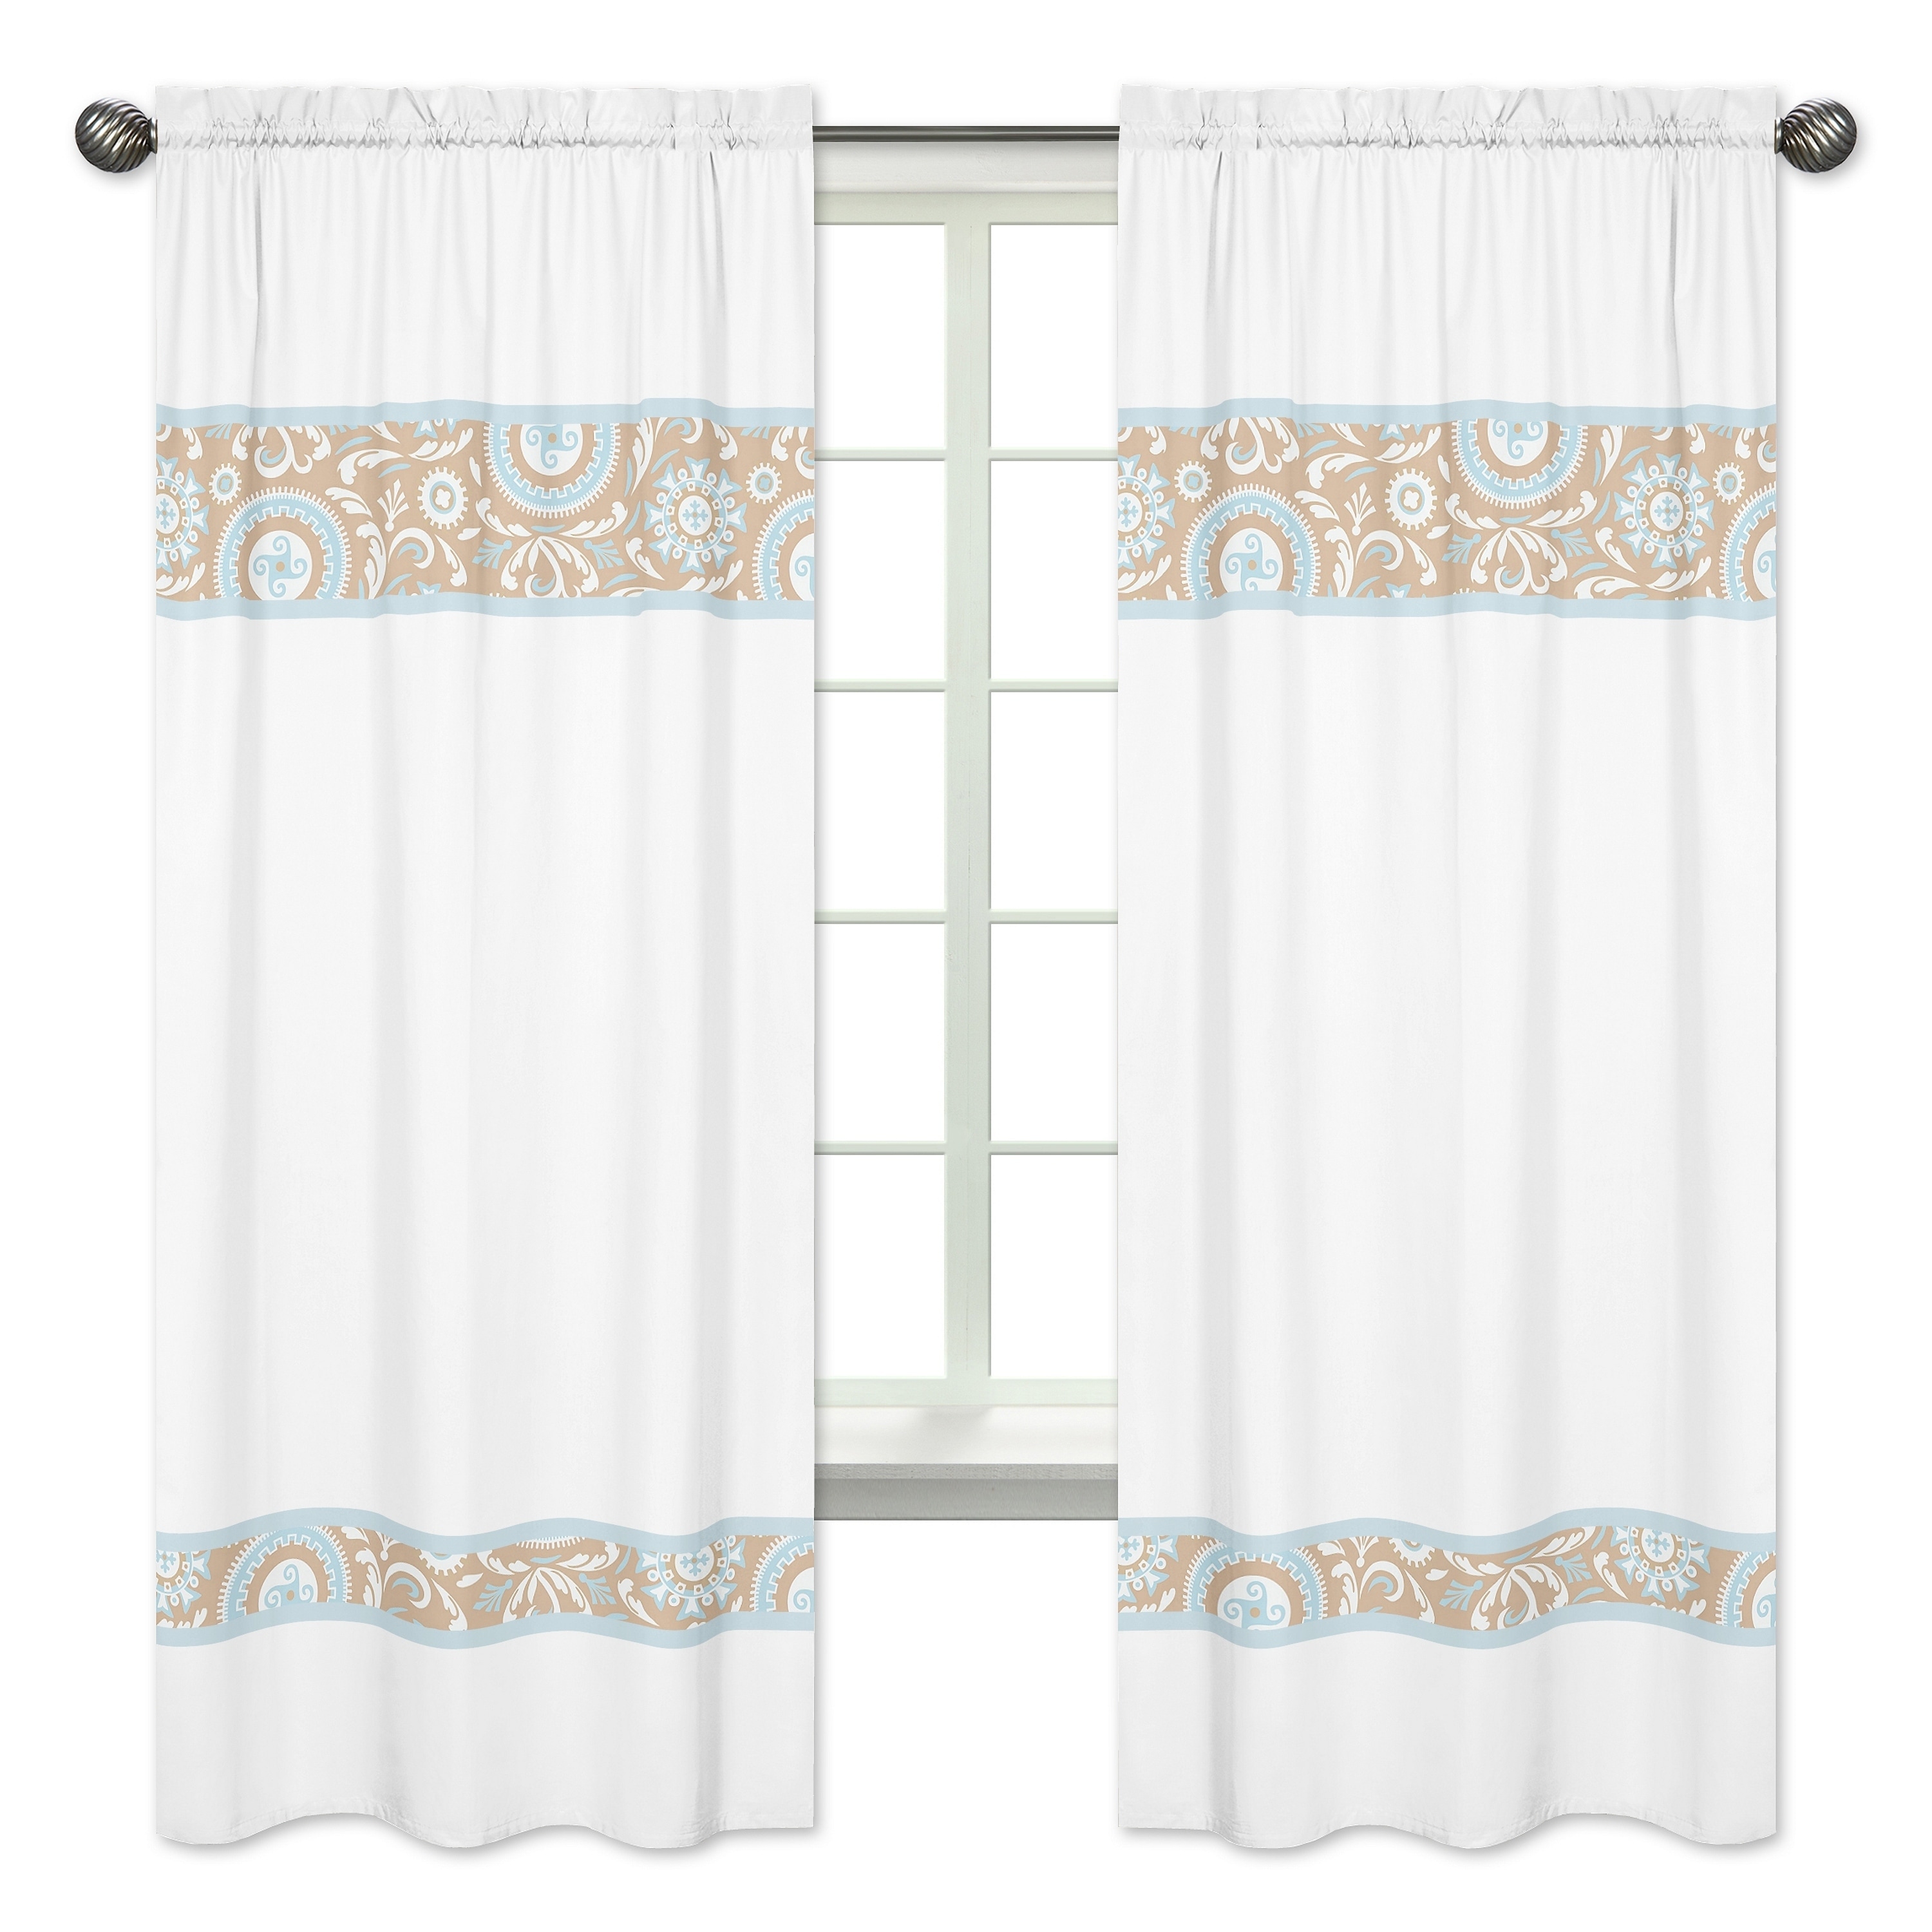 Blue/taupe Hayden 84 Inch Curtain Panels (set Of 2) (Blue/taupe/whiteCurtain style Window panelConstruction Rod pocketPocket measures 1.5 inchesLining Not linedDimensions 42 inches wide x 84 inches long each panelMaterial 100 percent cottonCare inst